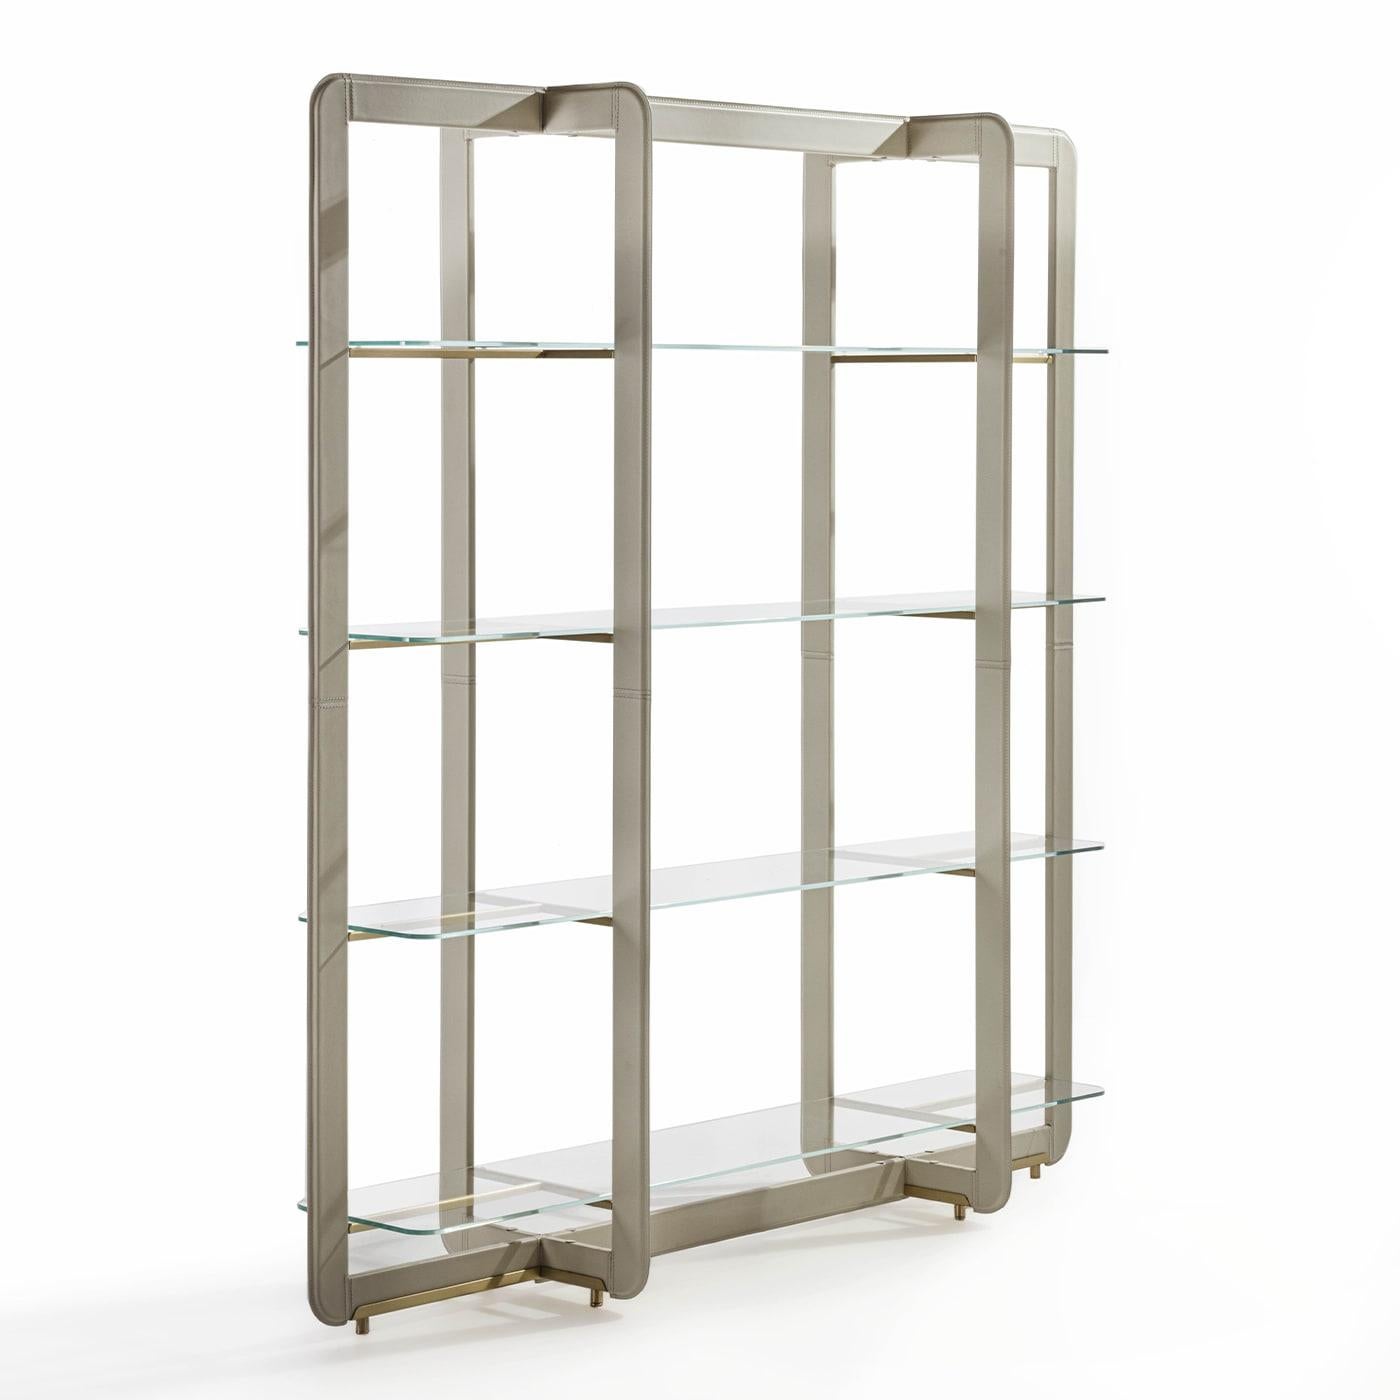 Intersecting elements arranged in impeccable harmony define the airy and dynamic silhouette of this bookcase, a superb design whose prized materials make it a plush accent in professional contexts or living rooms. The rectangular-cut, cylindrical